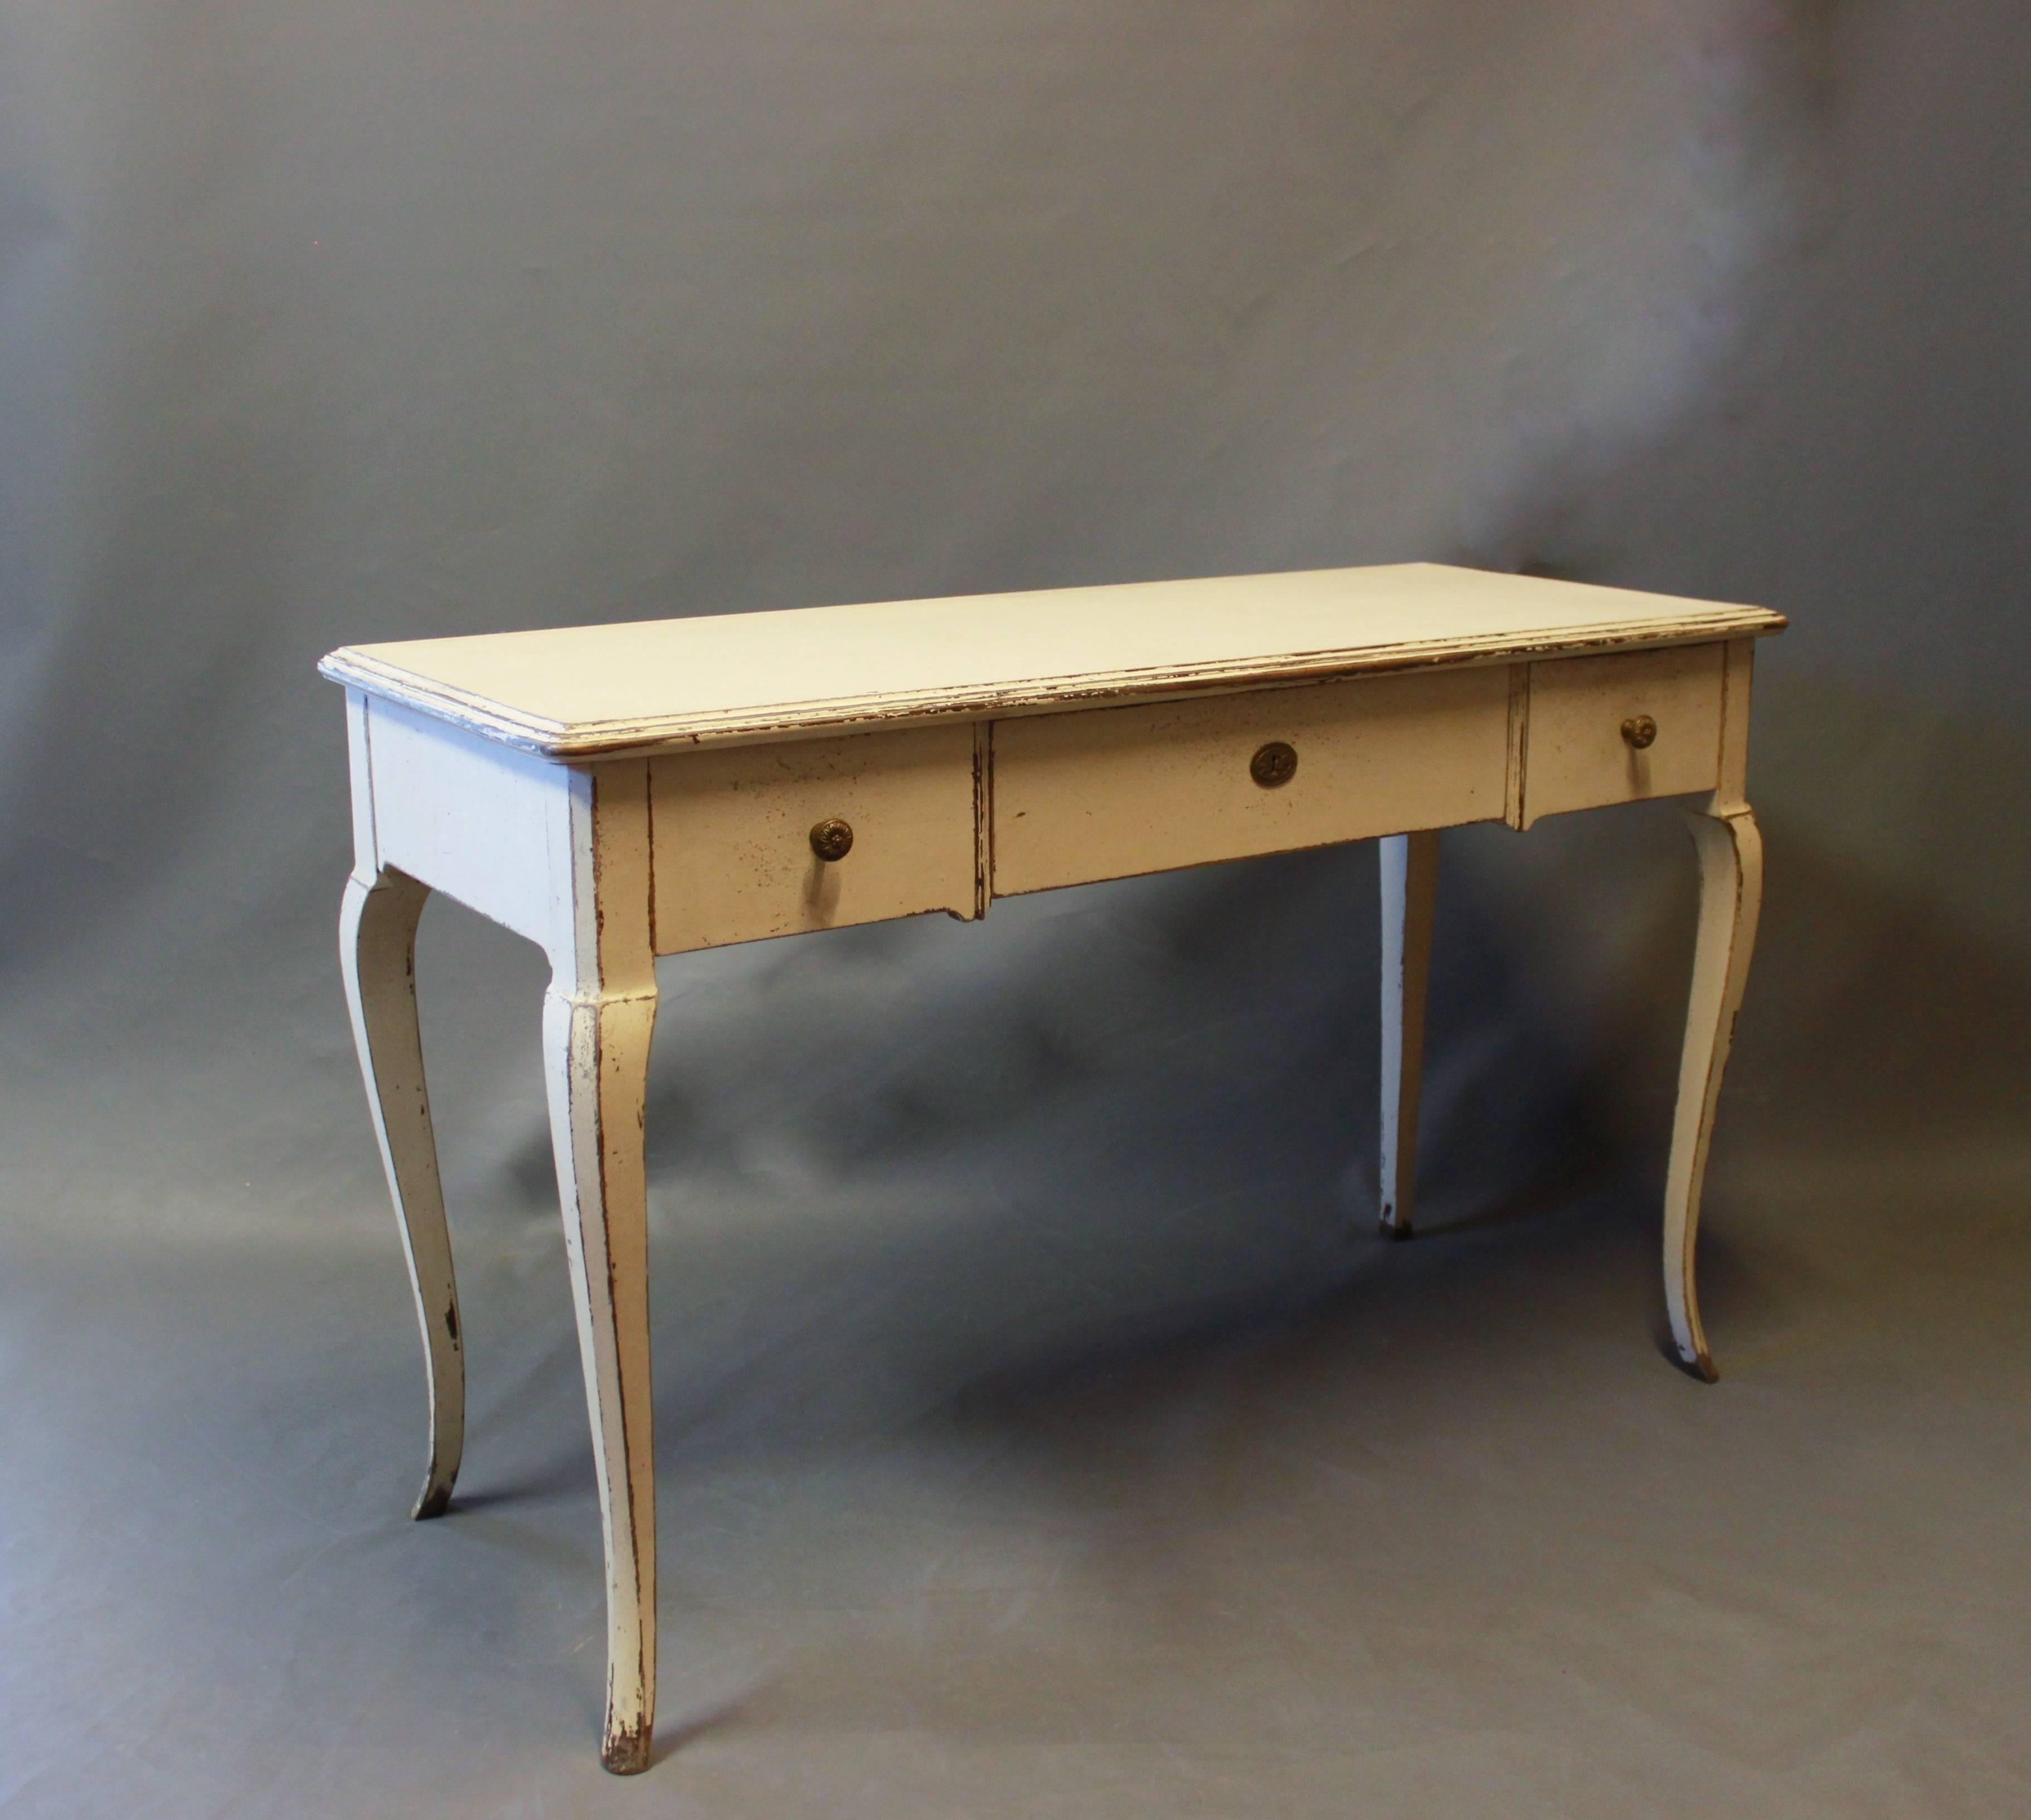 Exquisite Gray Painted Desk, Reflecting Gustavian Elegance from the 1930s: A timeless piece that embodies the refined aesthetic of the Gustavian style.

Crafted in the 1930s, this desk exudes the classic characteristics of Gustavian design with its